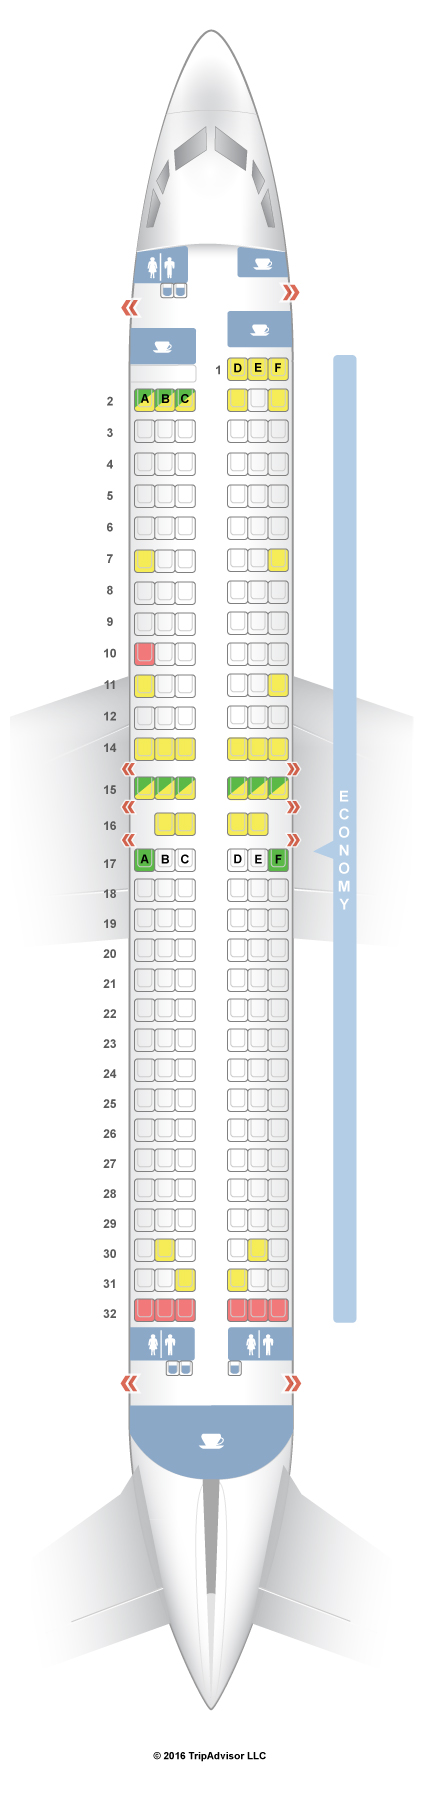 Boeing 737 Seating Chart